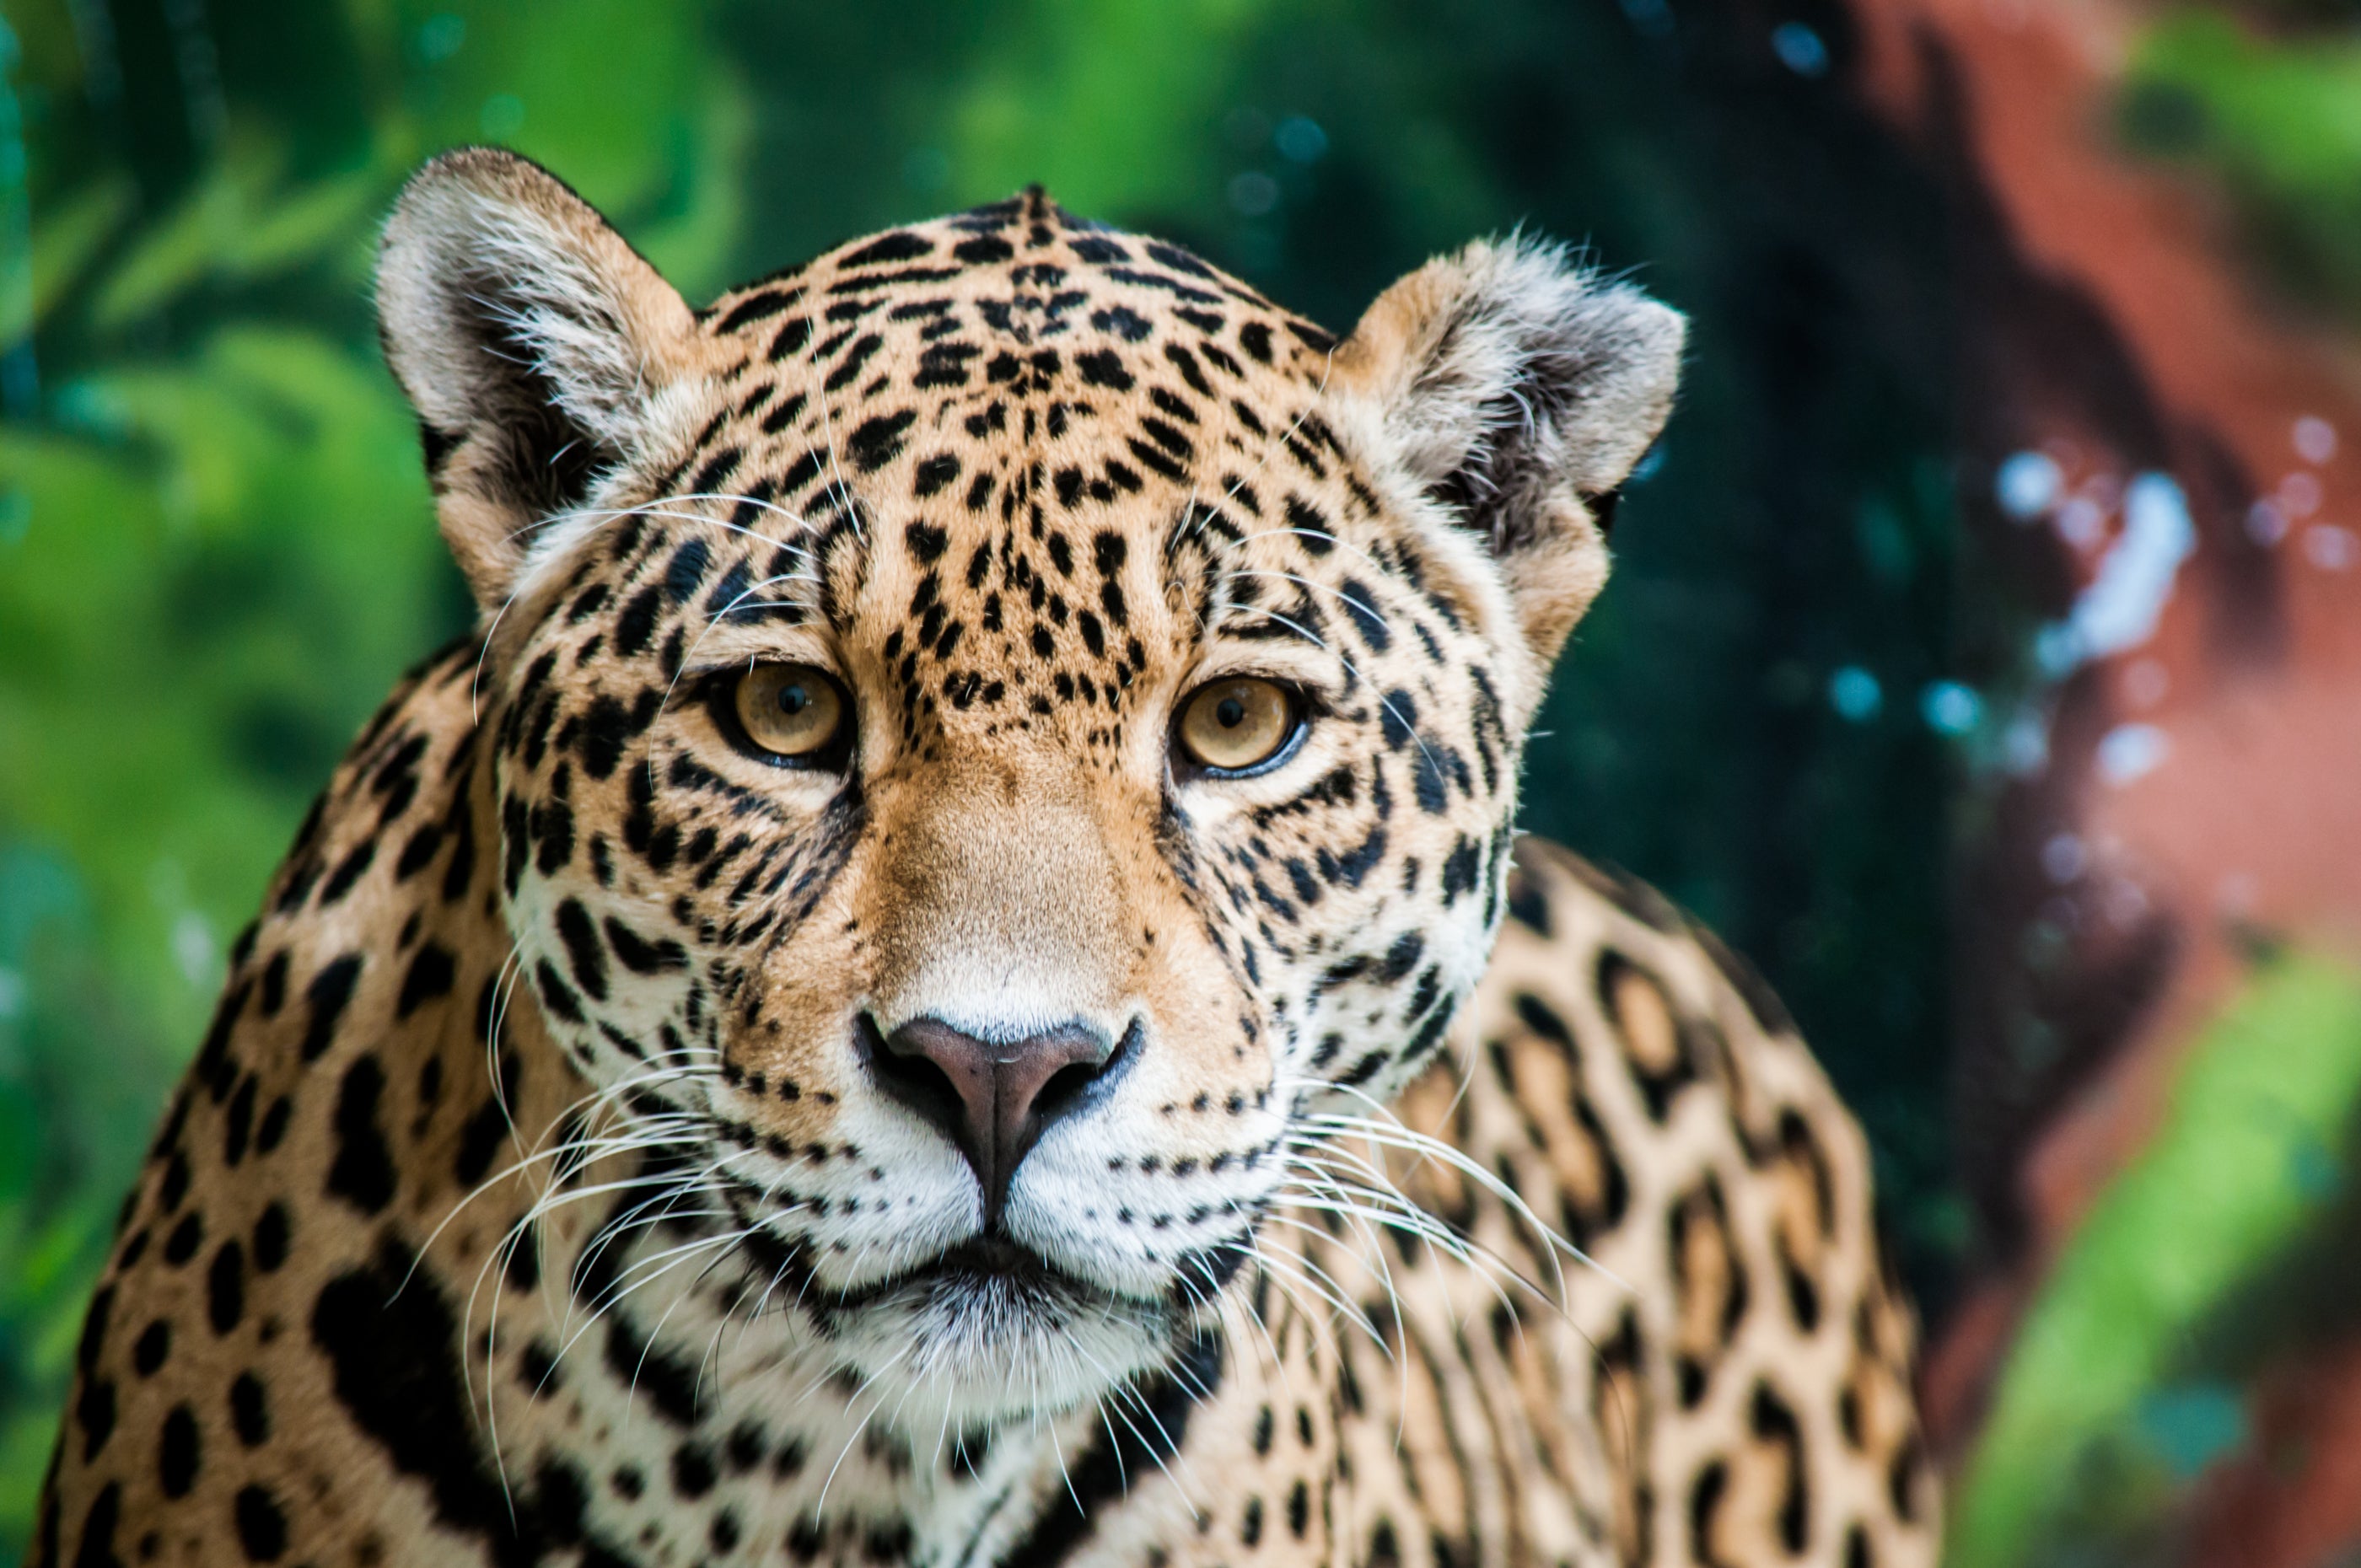 Jaguars are the largest cat species in the Americas